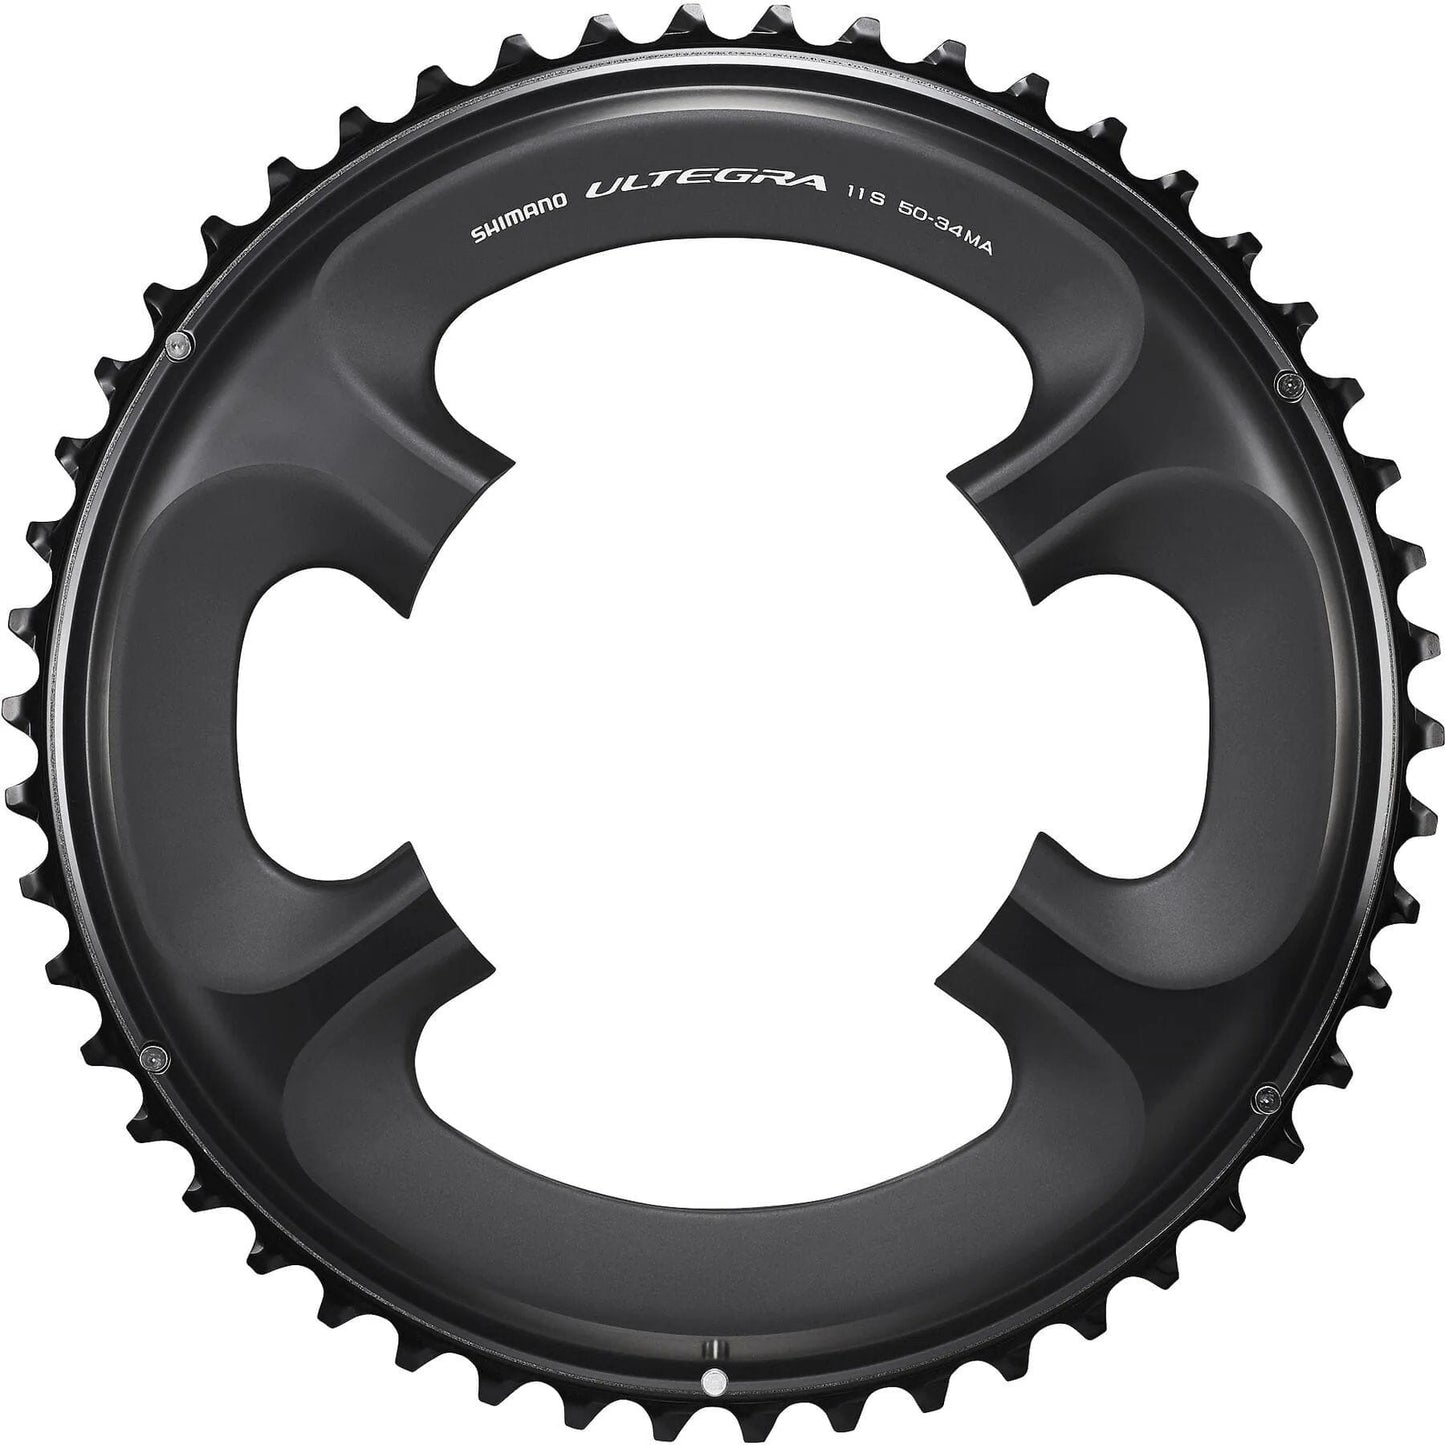 SHIMANO ULTEGRA 11-SPEED CHAINRING FOR FC-6800 50T (MA)